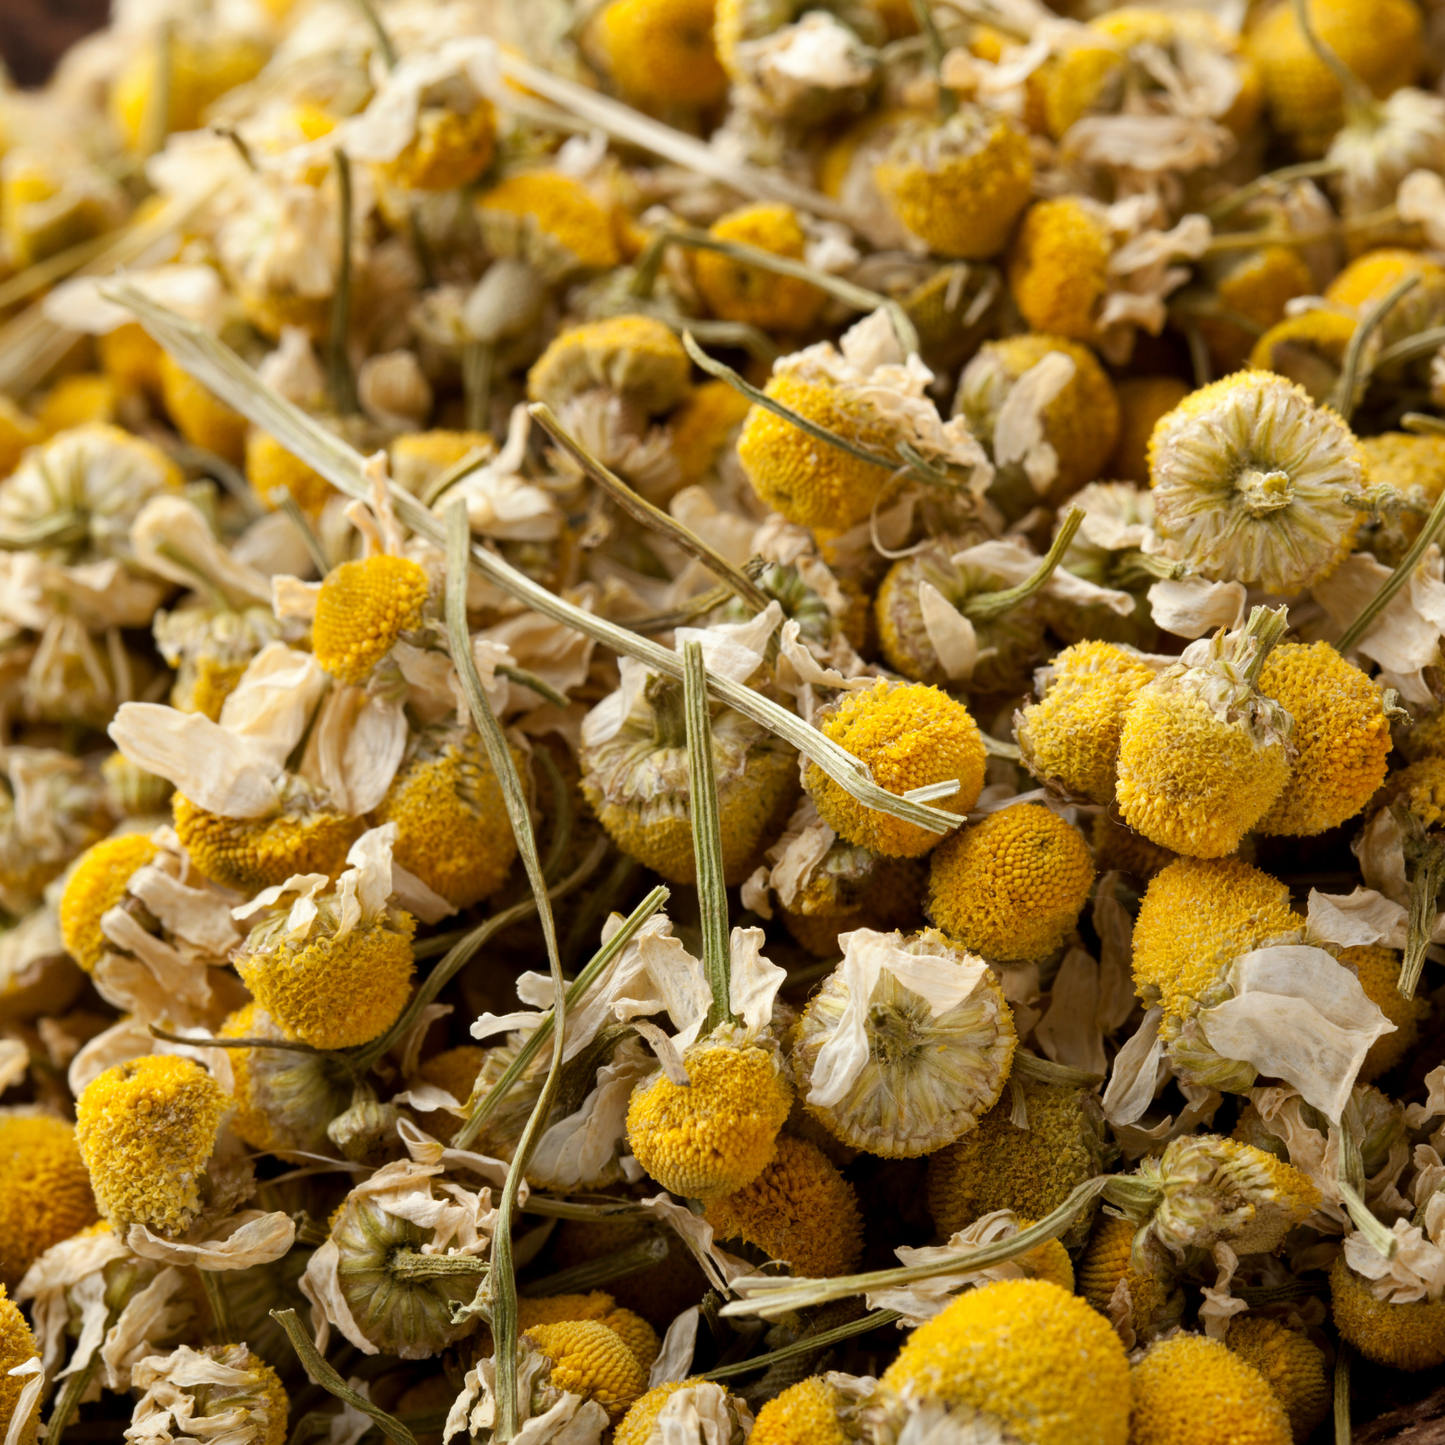 Witchy Pooh's Chamomile Flowers Loose Leaf Herbal Tea, Caffeine Free, For Stress Relief and Sleep Aid